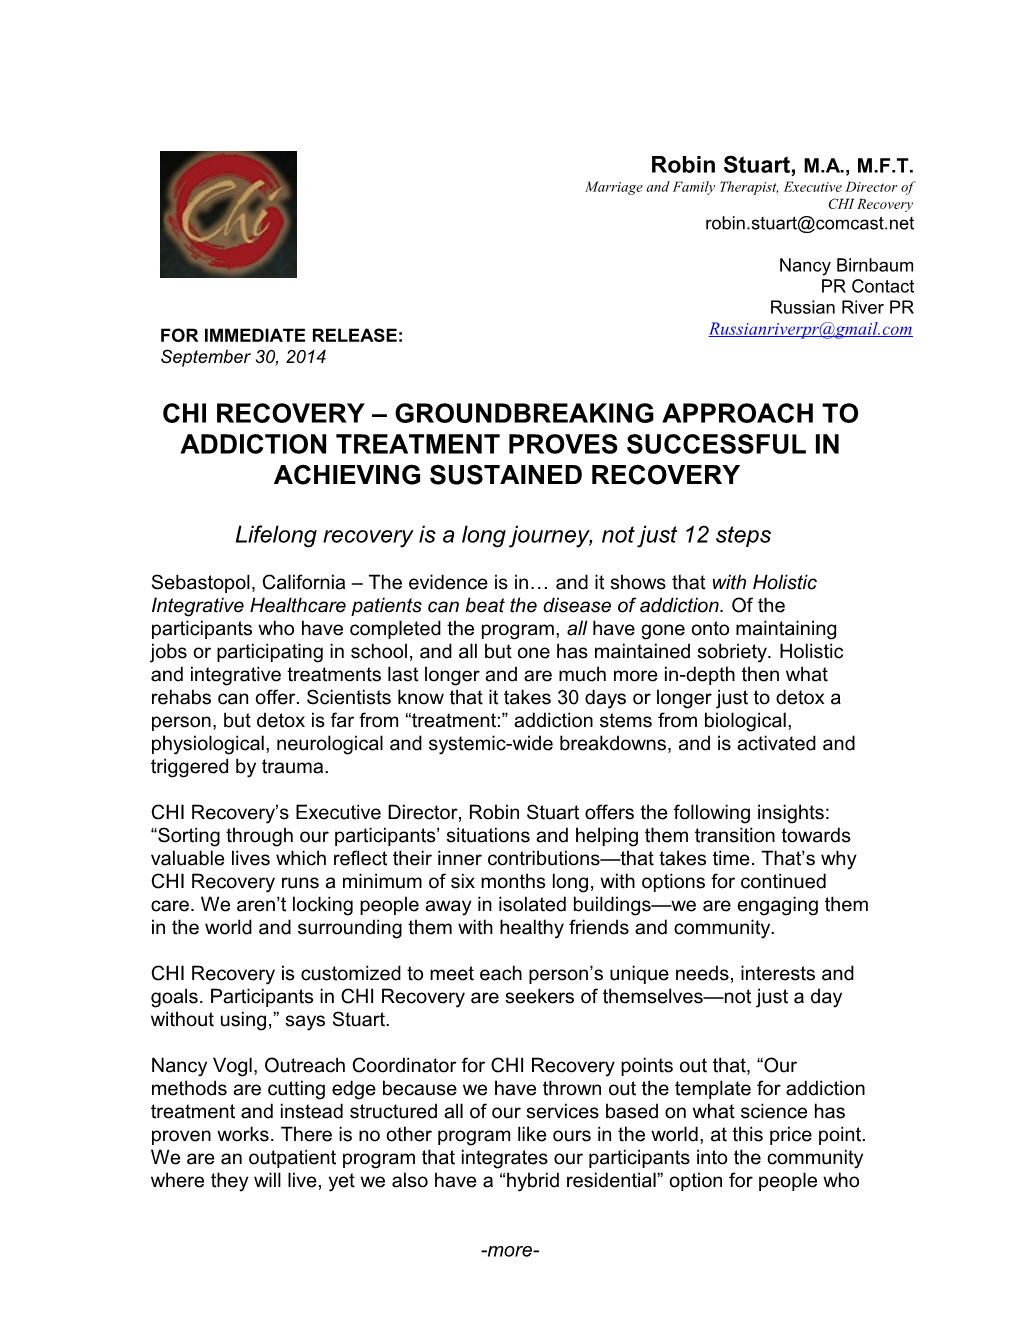 Chi Recovery Groundbreaking Approach to Addiction Treatment Proves Successful In